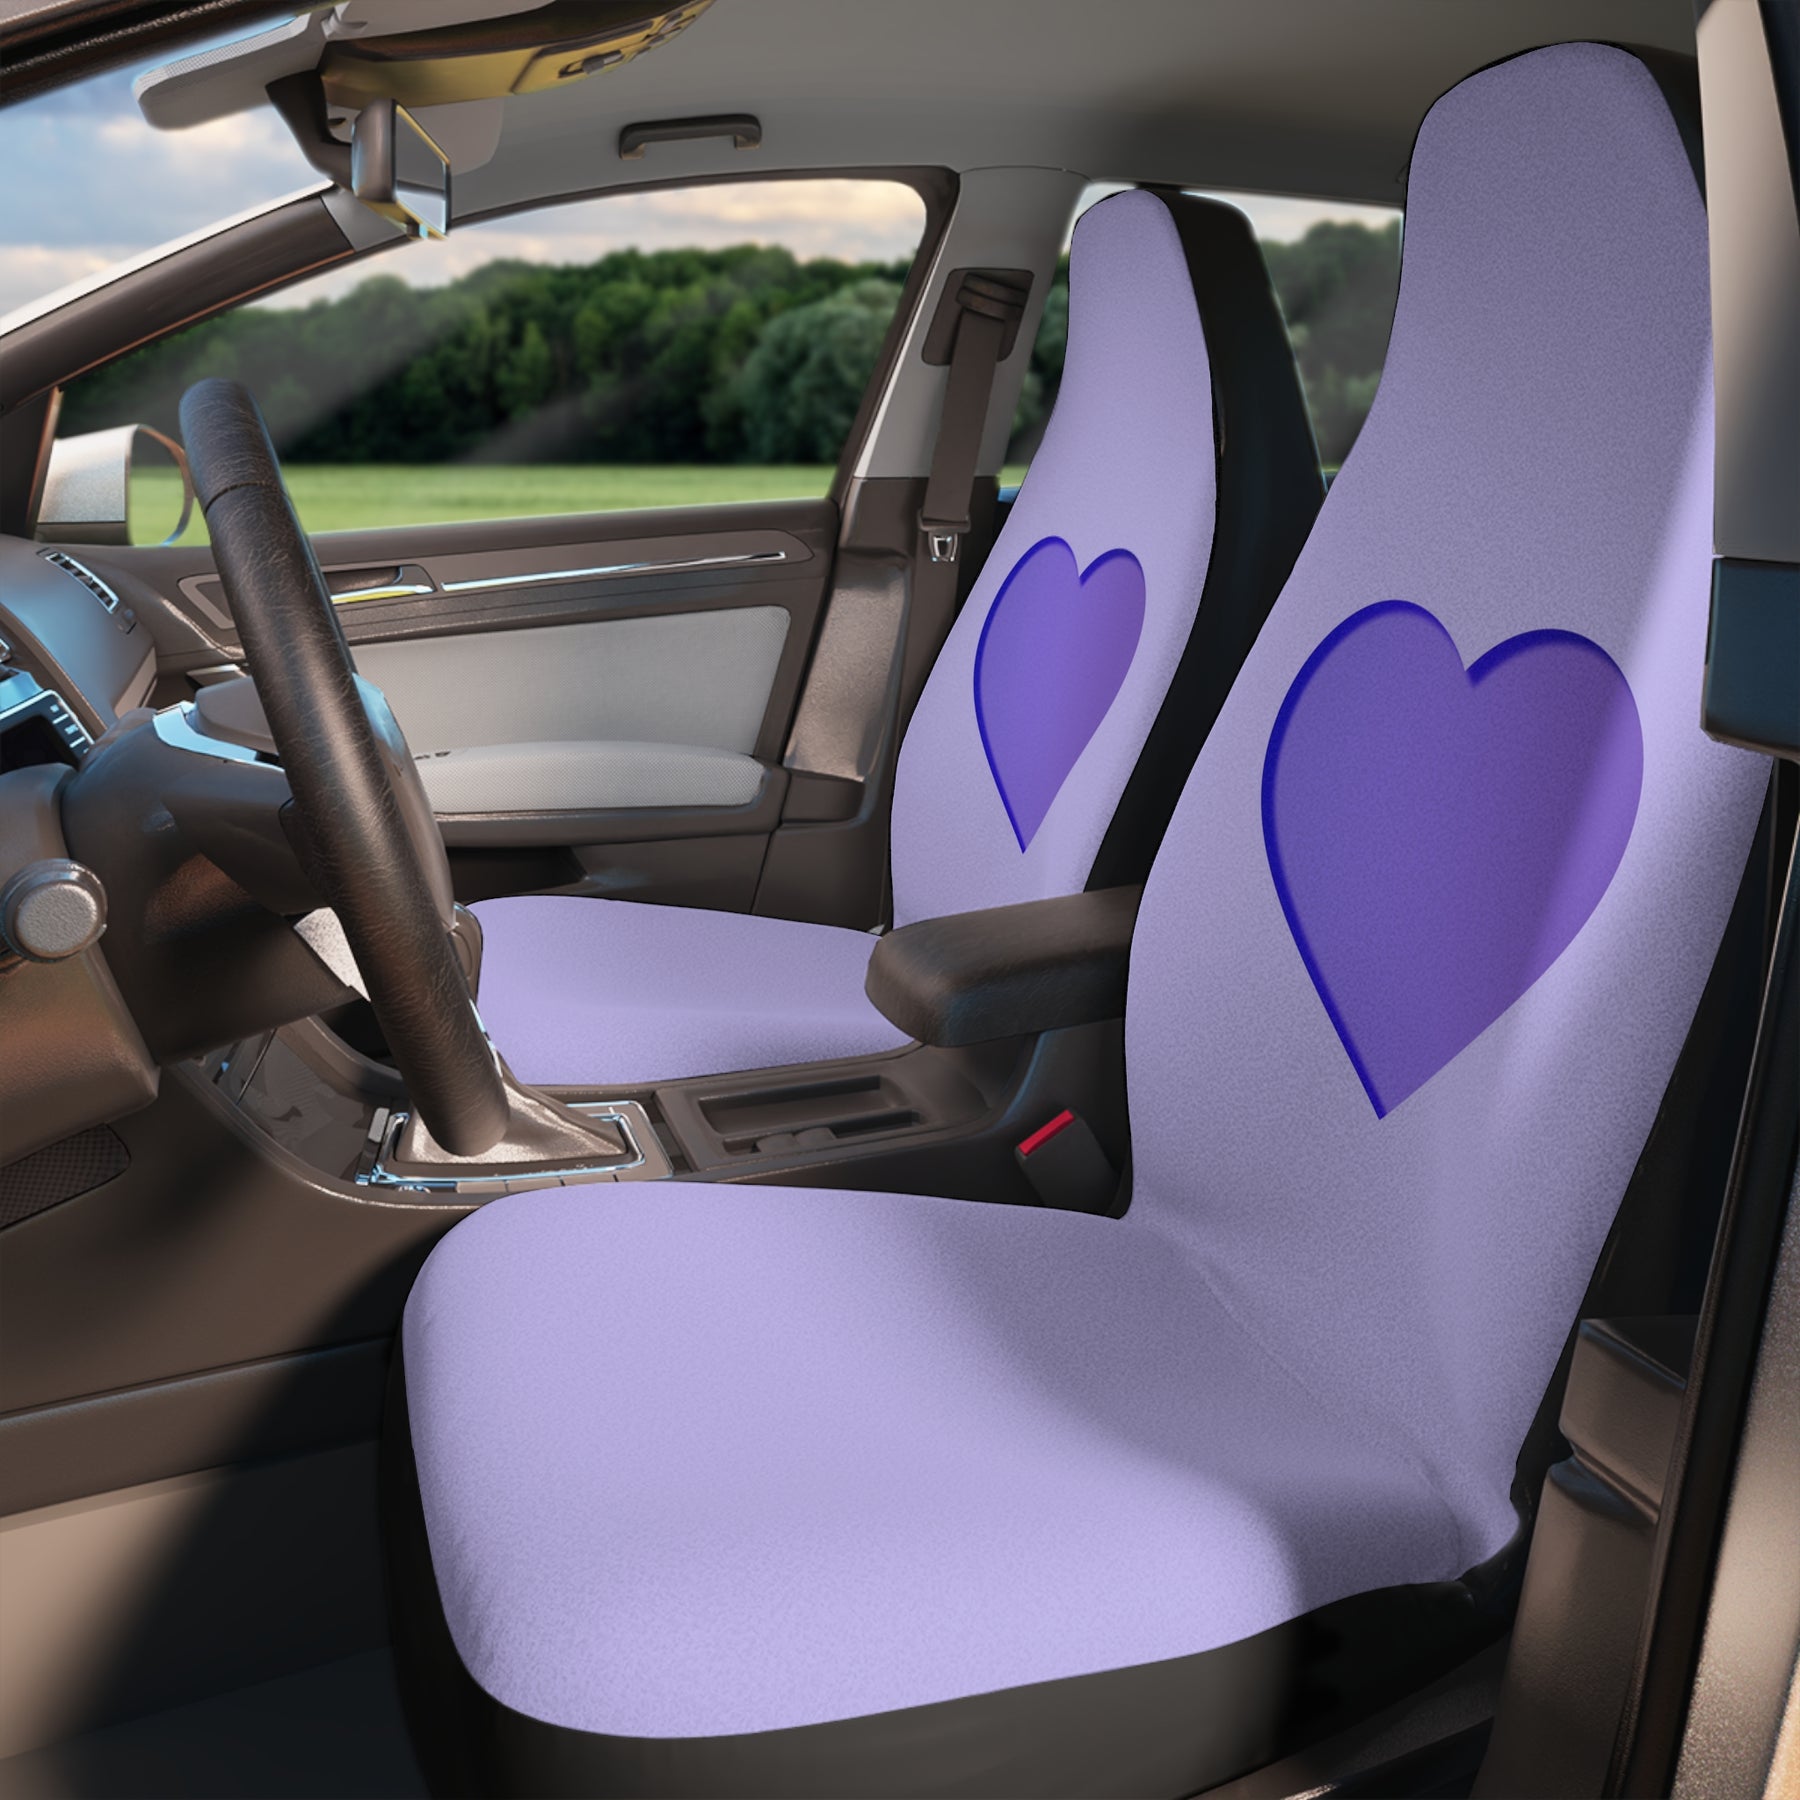 Purple Heart Car Seat Covers Set,Aesthetic heart Car Seat Covers,Cute Girly Car Decor,Textured car seat cover,car accessories for women